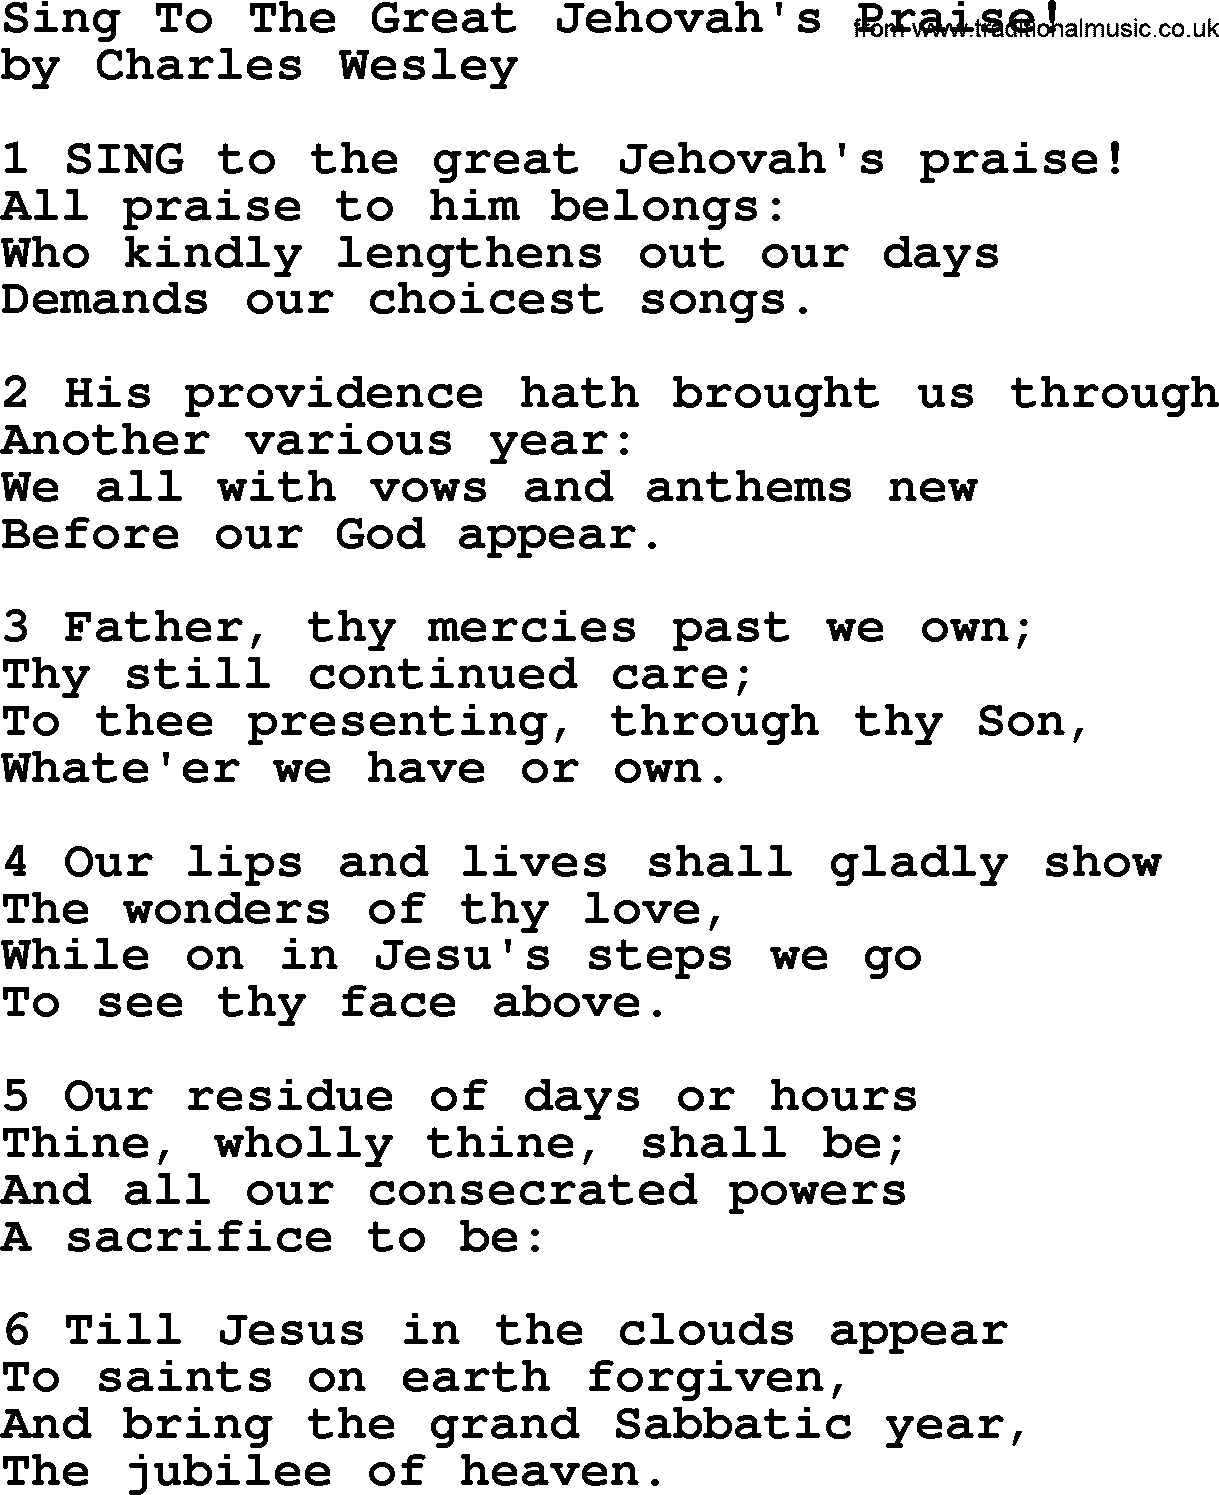 Charles Wesley hymn: Sing To The Great Jehovah's Praise!, lyrics